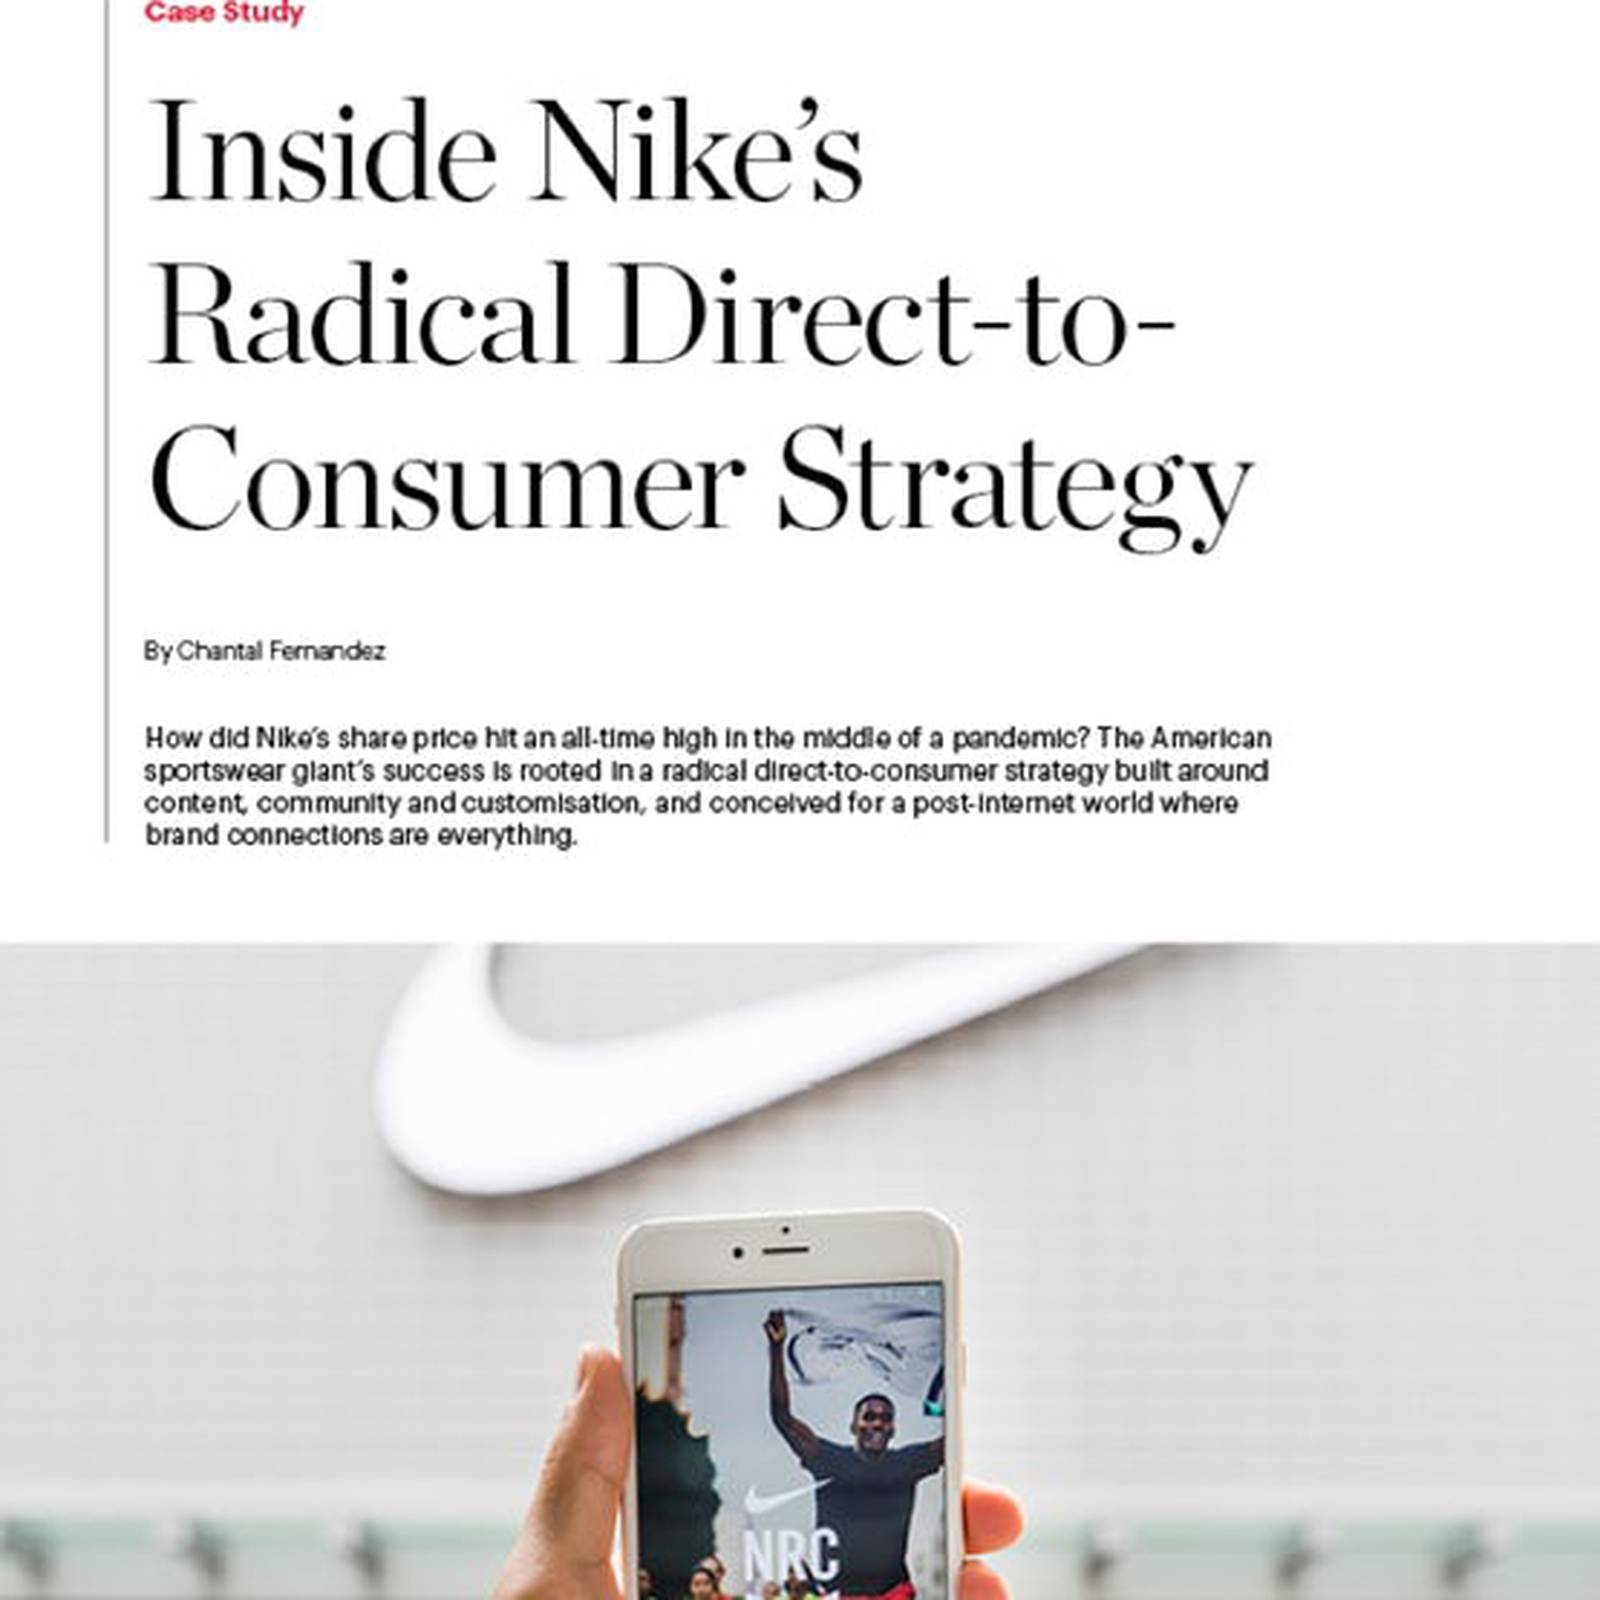 lote seda Juramento Inside Nike's Radical Direct-to-Consumer Strategy — Download the Case Study  | BoF